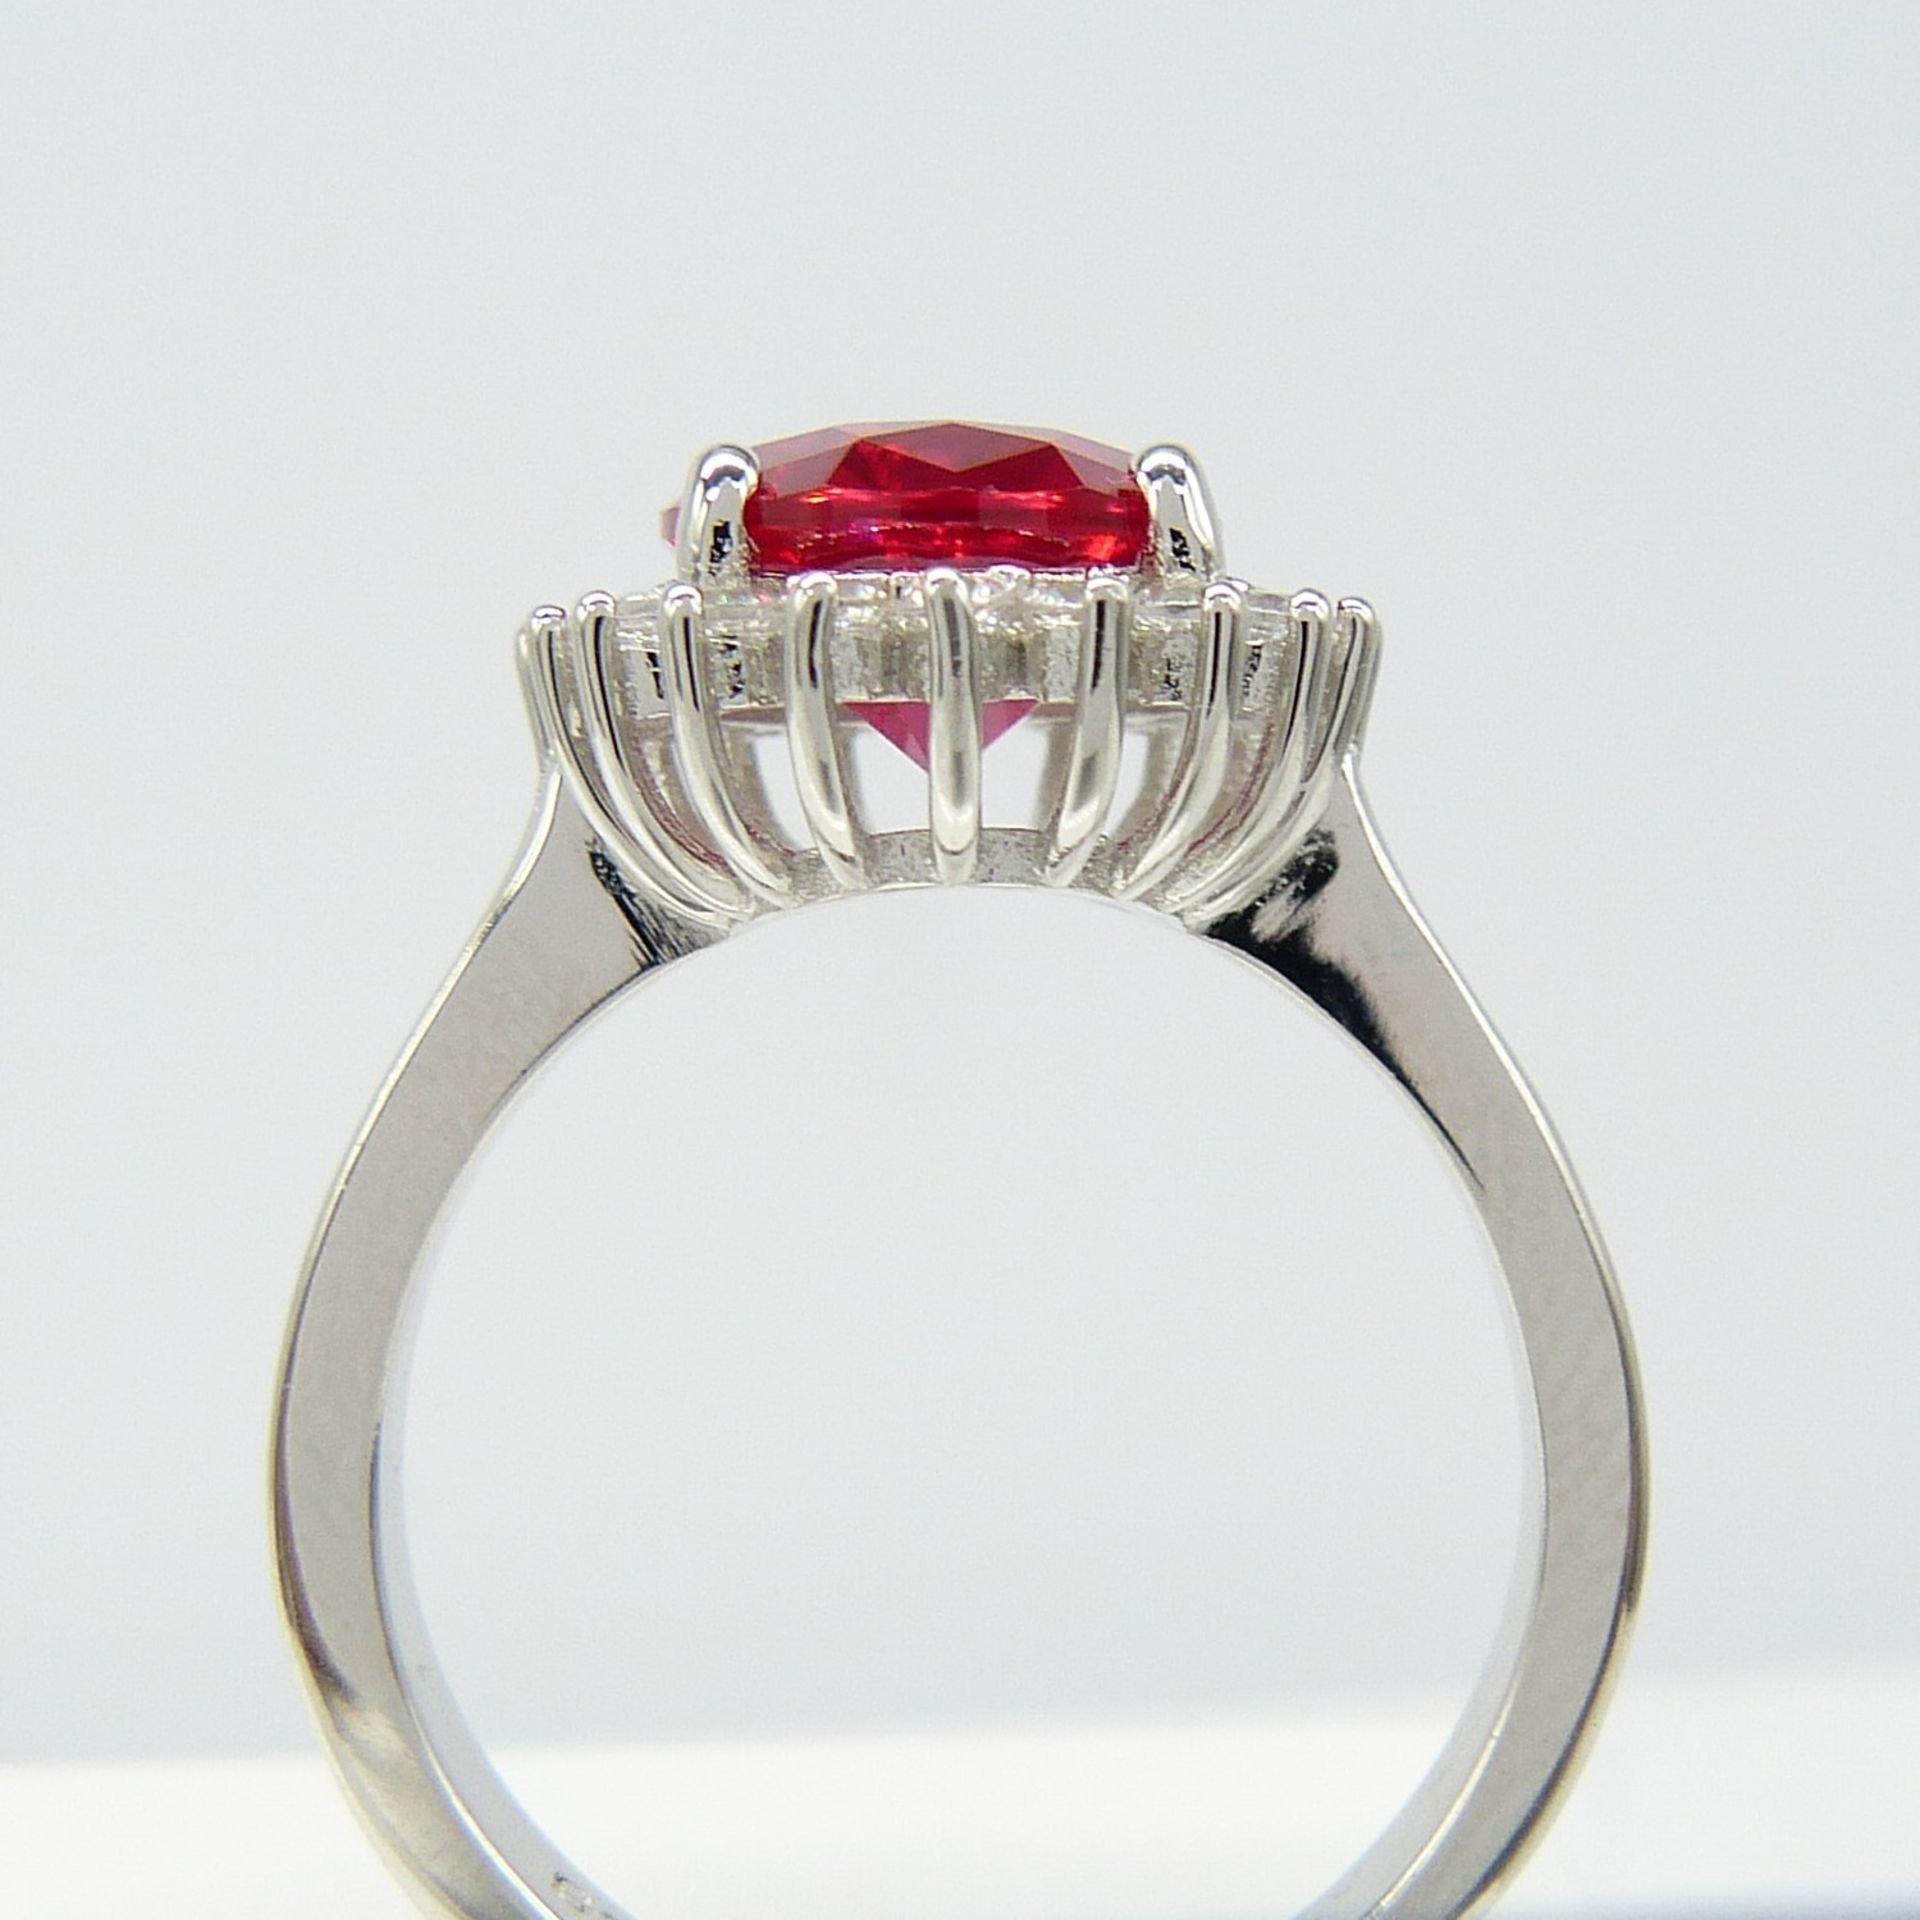 Sterling Silver Cluster Ring Set With Red and White Gems - Image 5 of 6